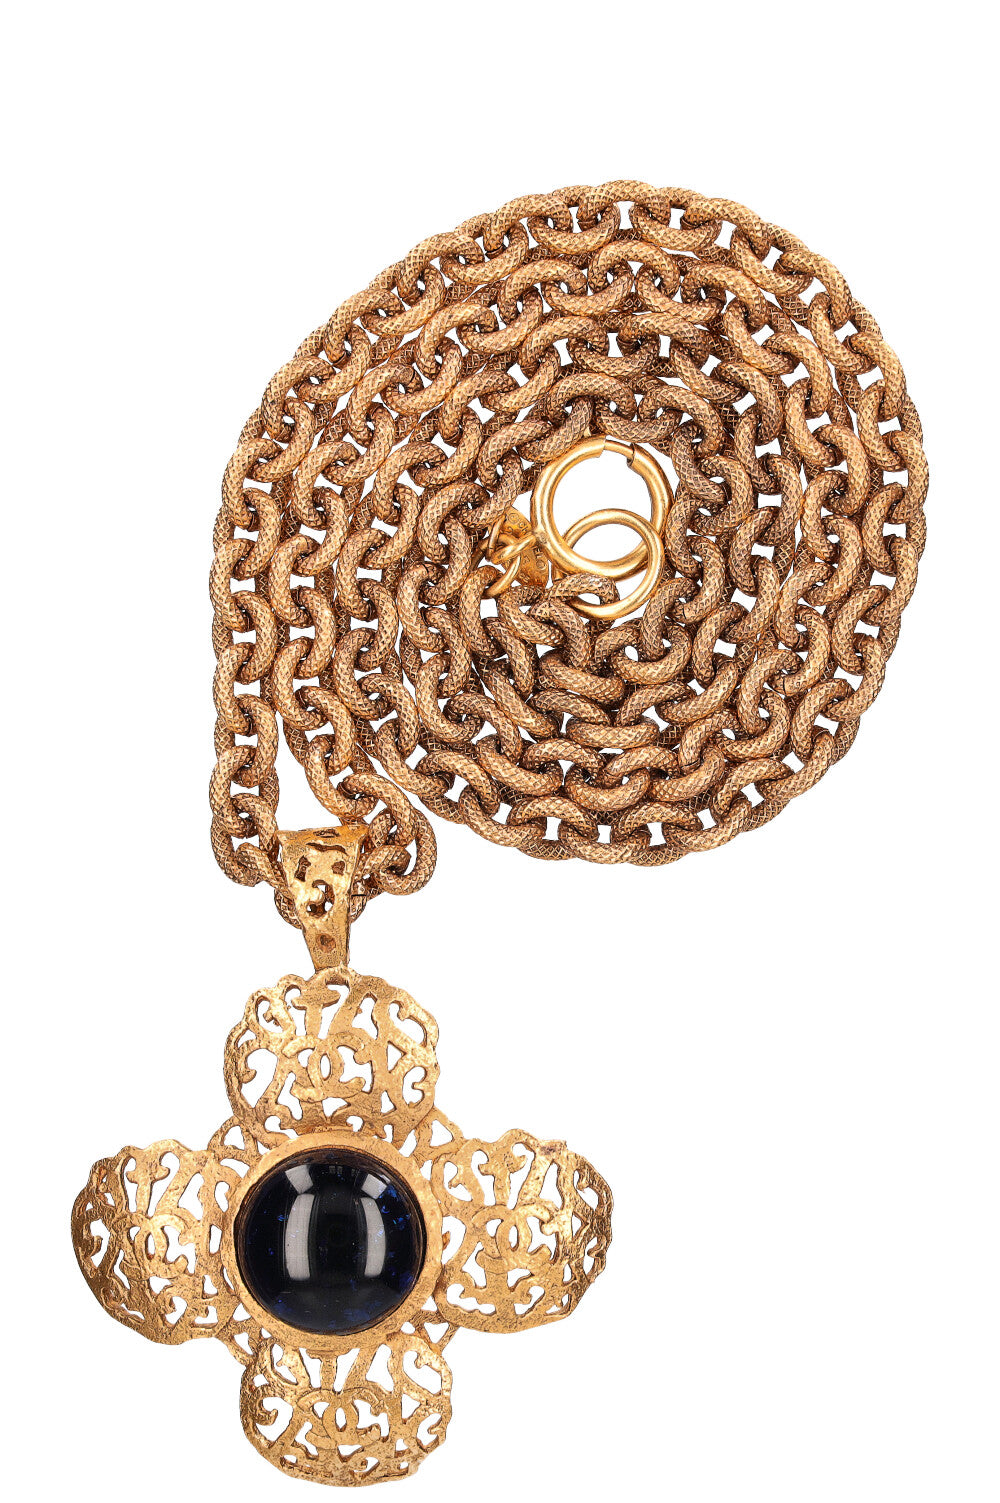 CHANEL | Jewelry | Chanel Cc Flower Charm Gold Chain Pendant Necklace  Accessories 96p 7463 | Poshmark